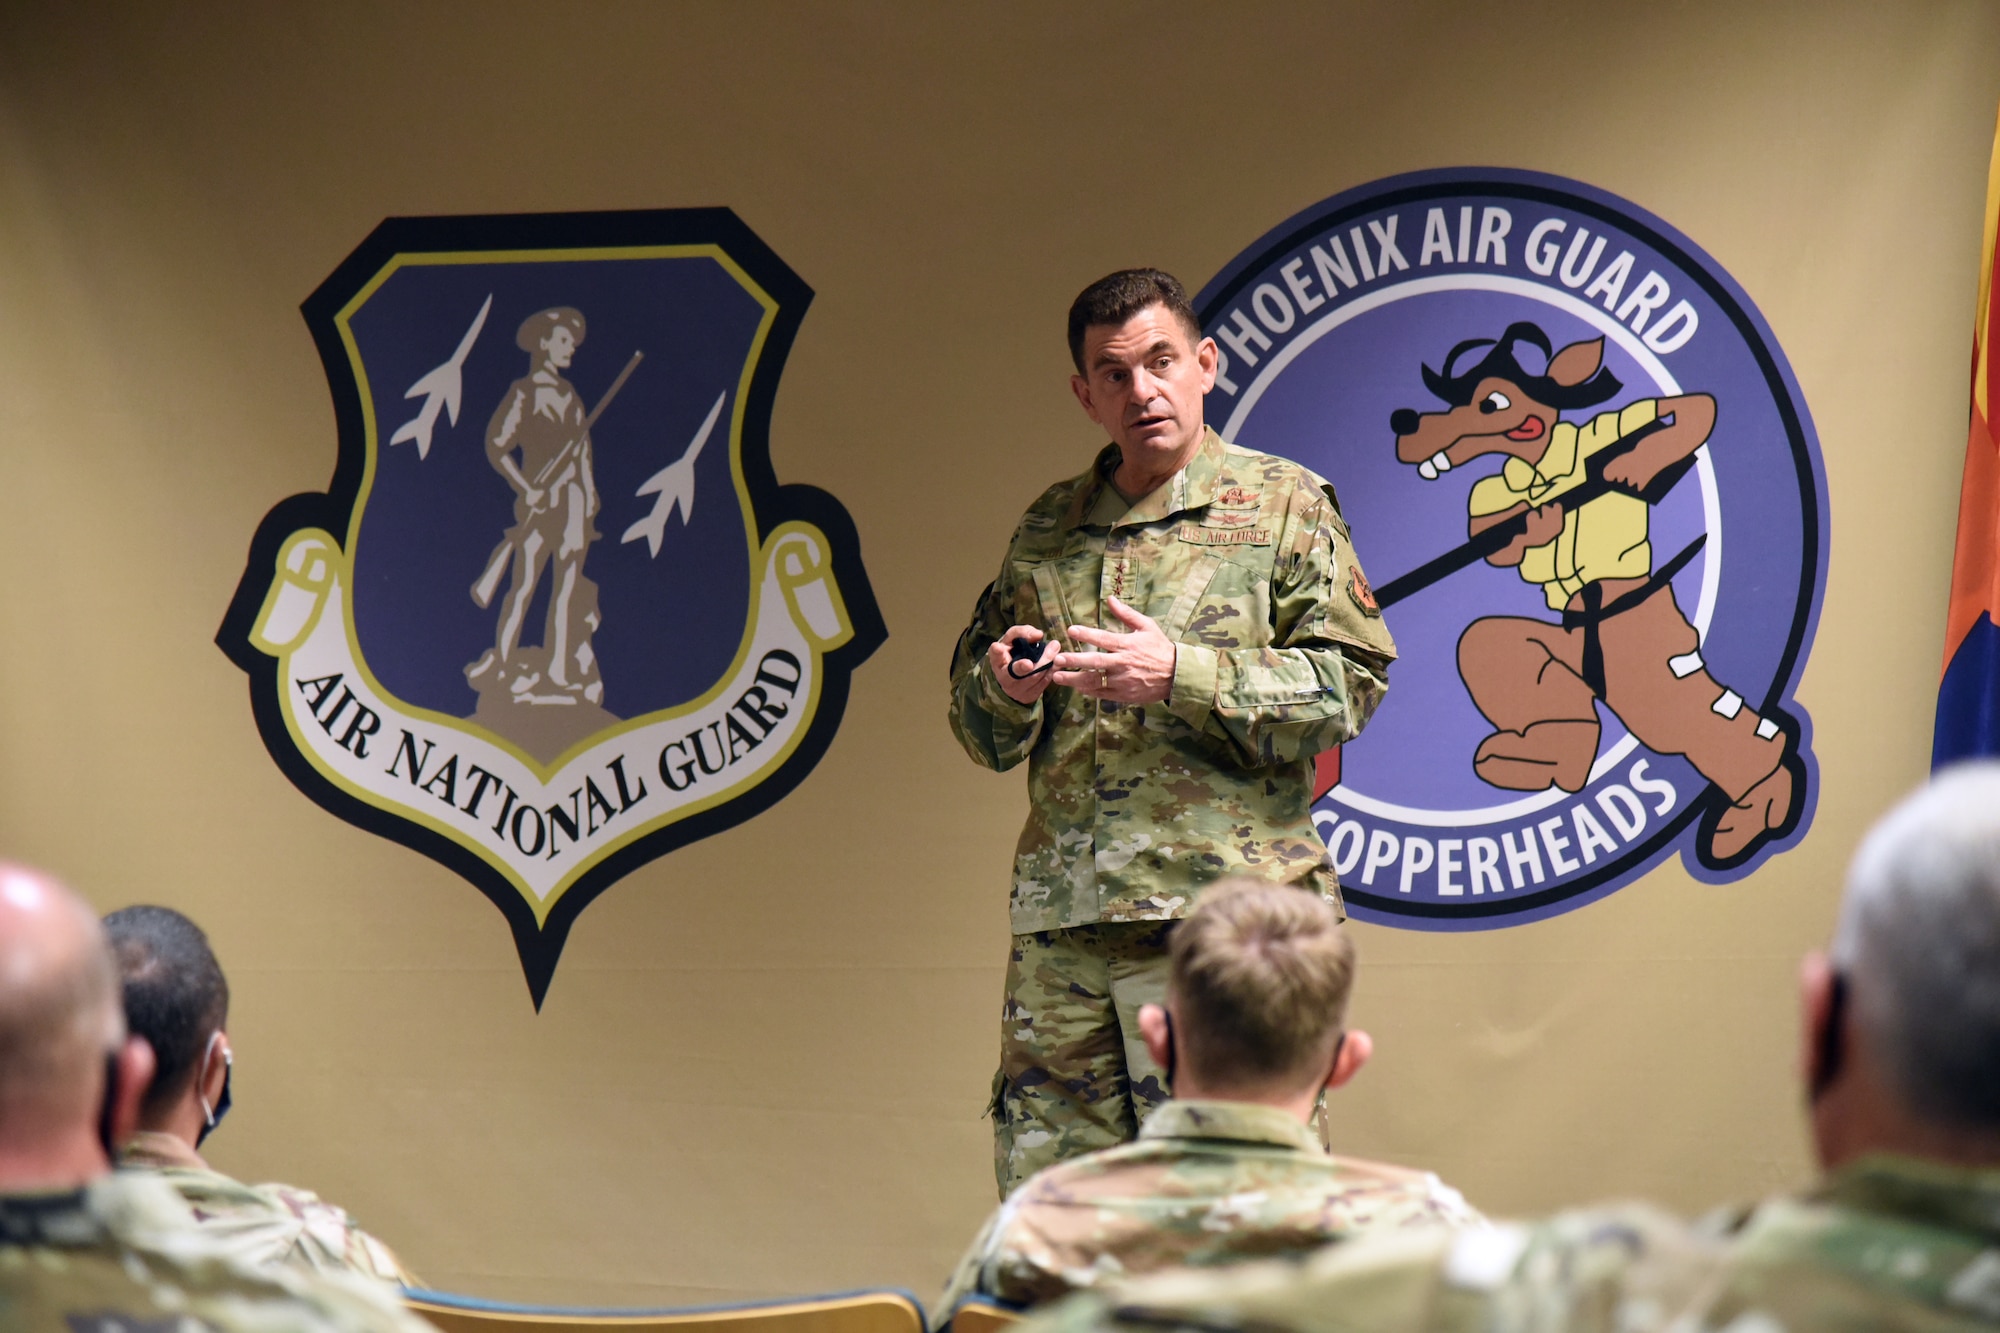 U.S. Air Force Lt. Gen. Michael A. Loh, director of the Air National Guard, speaks with Airmen of the 161st Air Refueling Wing, during a visit to Goldwater Air National Guard Base, Phoenix, Oct. 19, 2020. Loh visited with Airmen and base leadership as well as conducting a town hall style Q&A